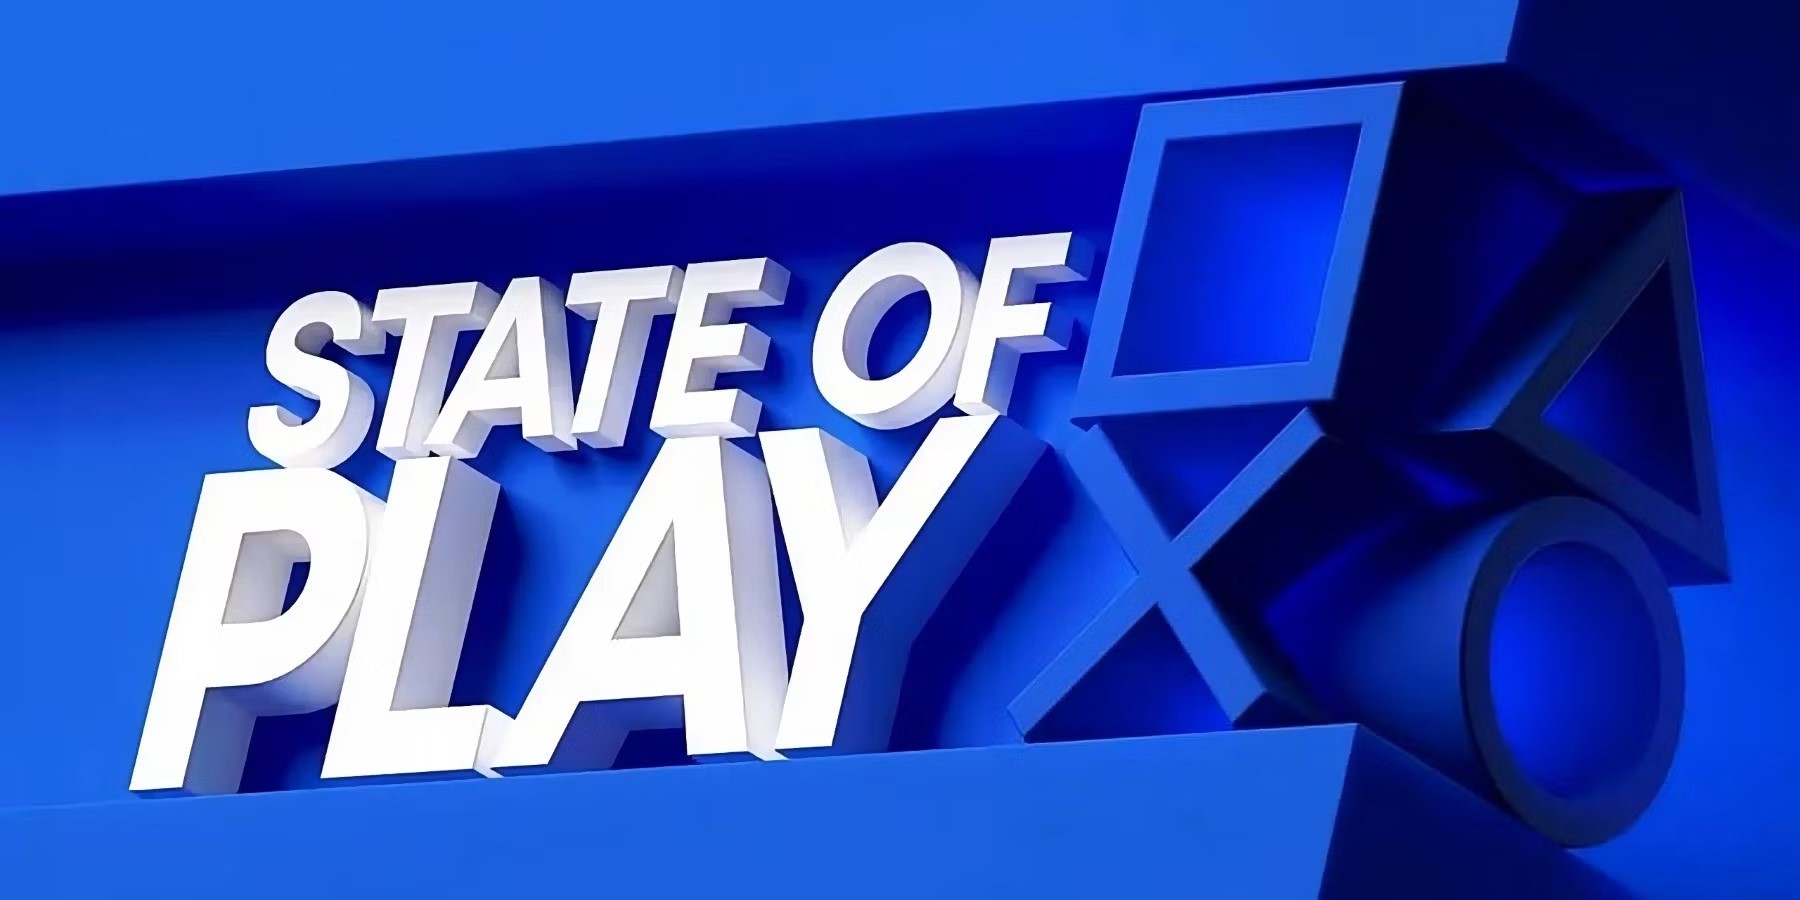 Sony Confirms State Of Play, Will Last 40 Minutes And Feature Stellar Blade